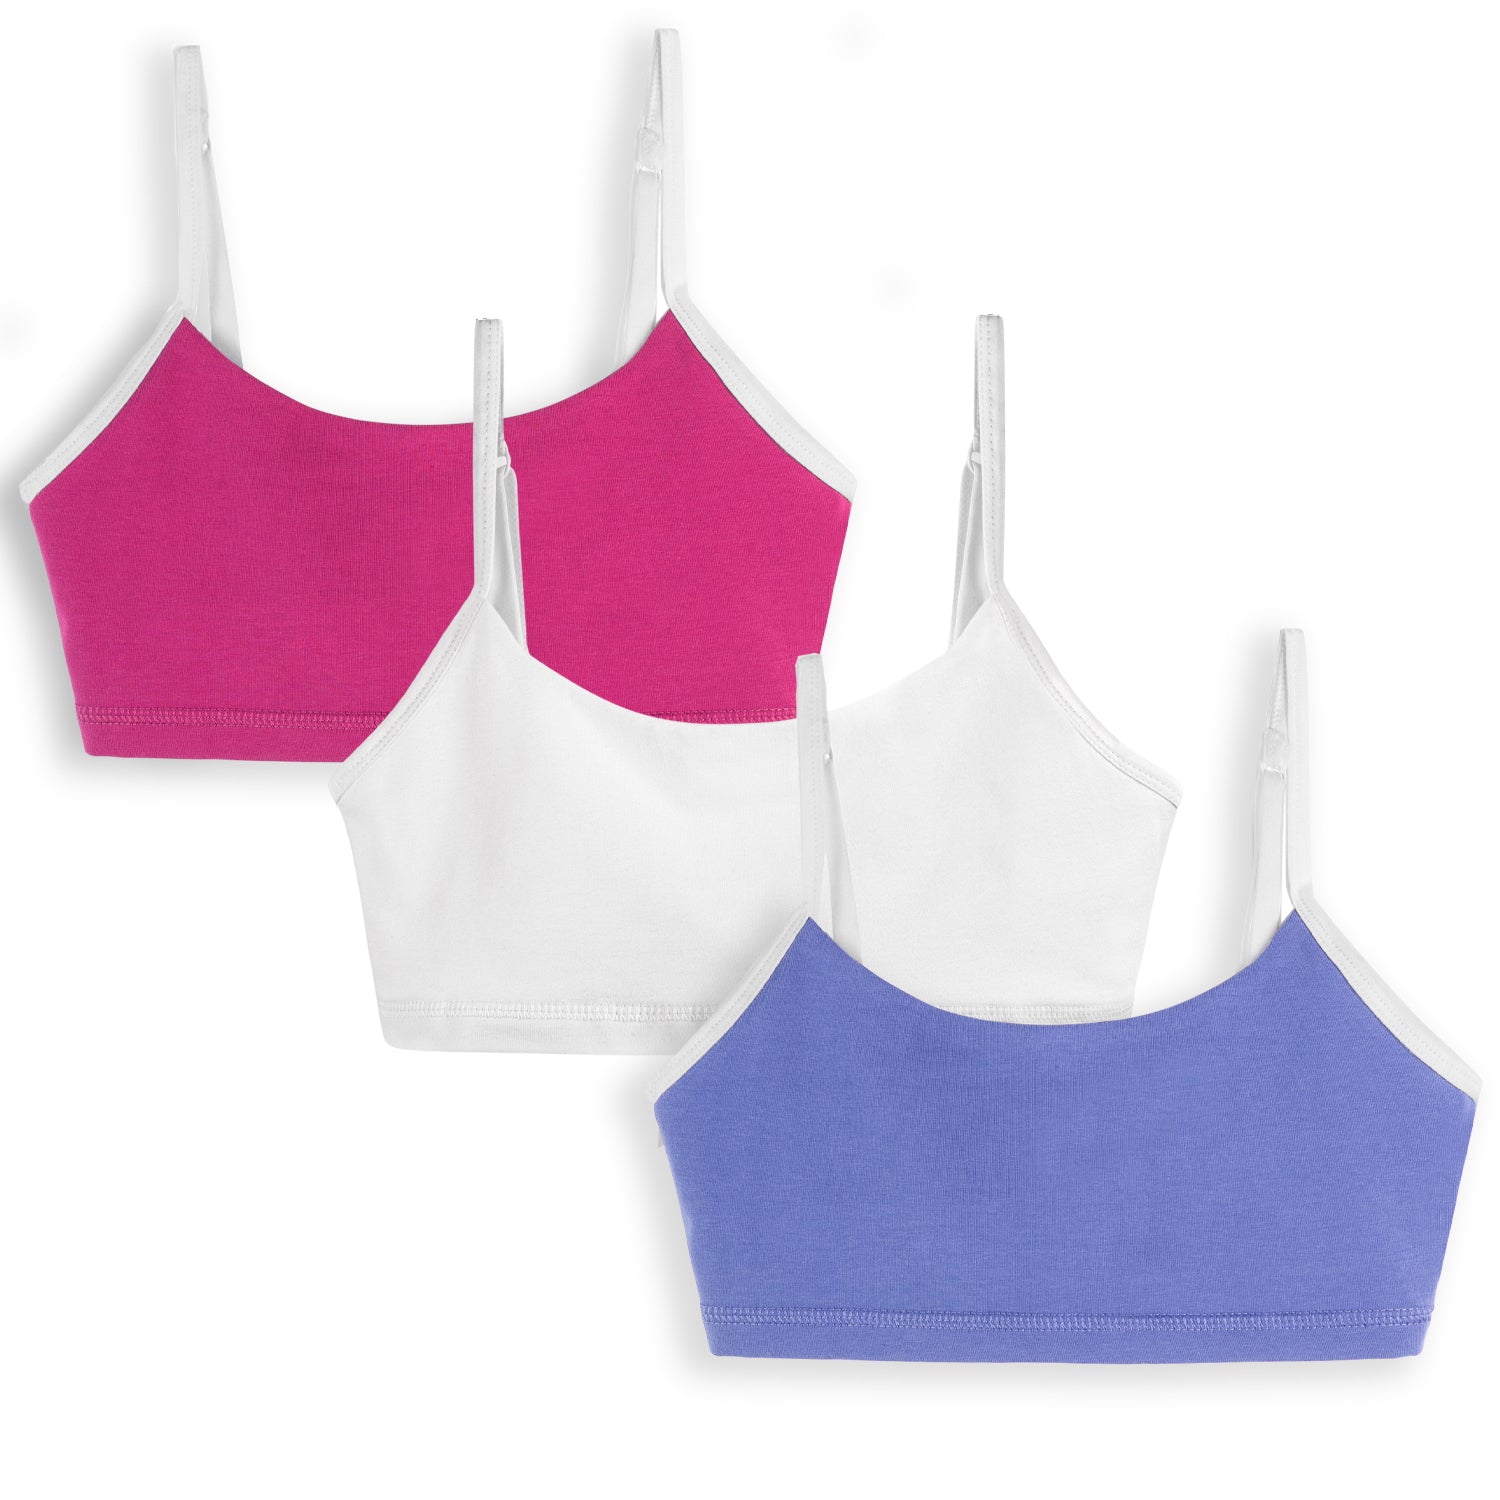 Hypoallergenic Organic Cotton Bra Sets: 7 + 1 Reasons Why You Need These!